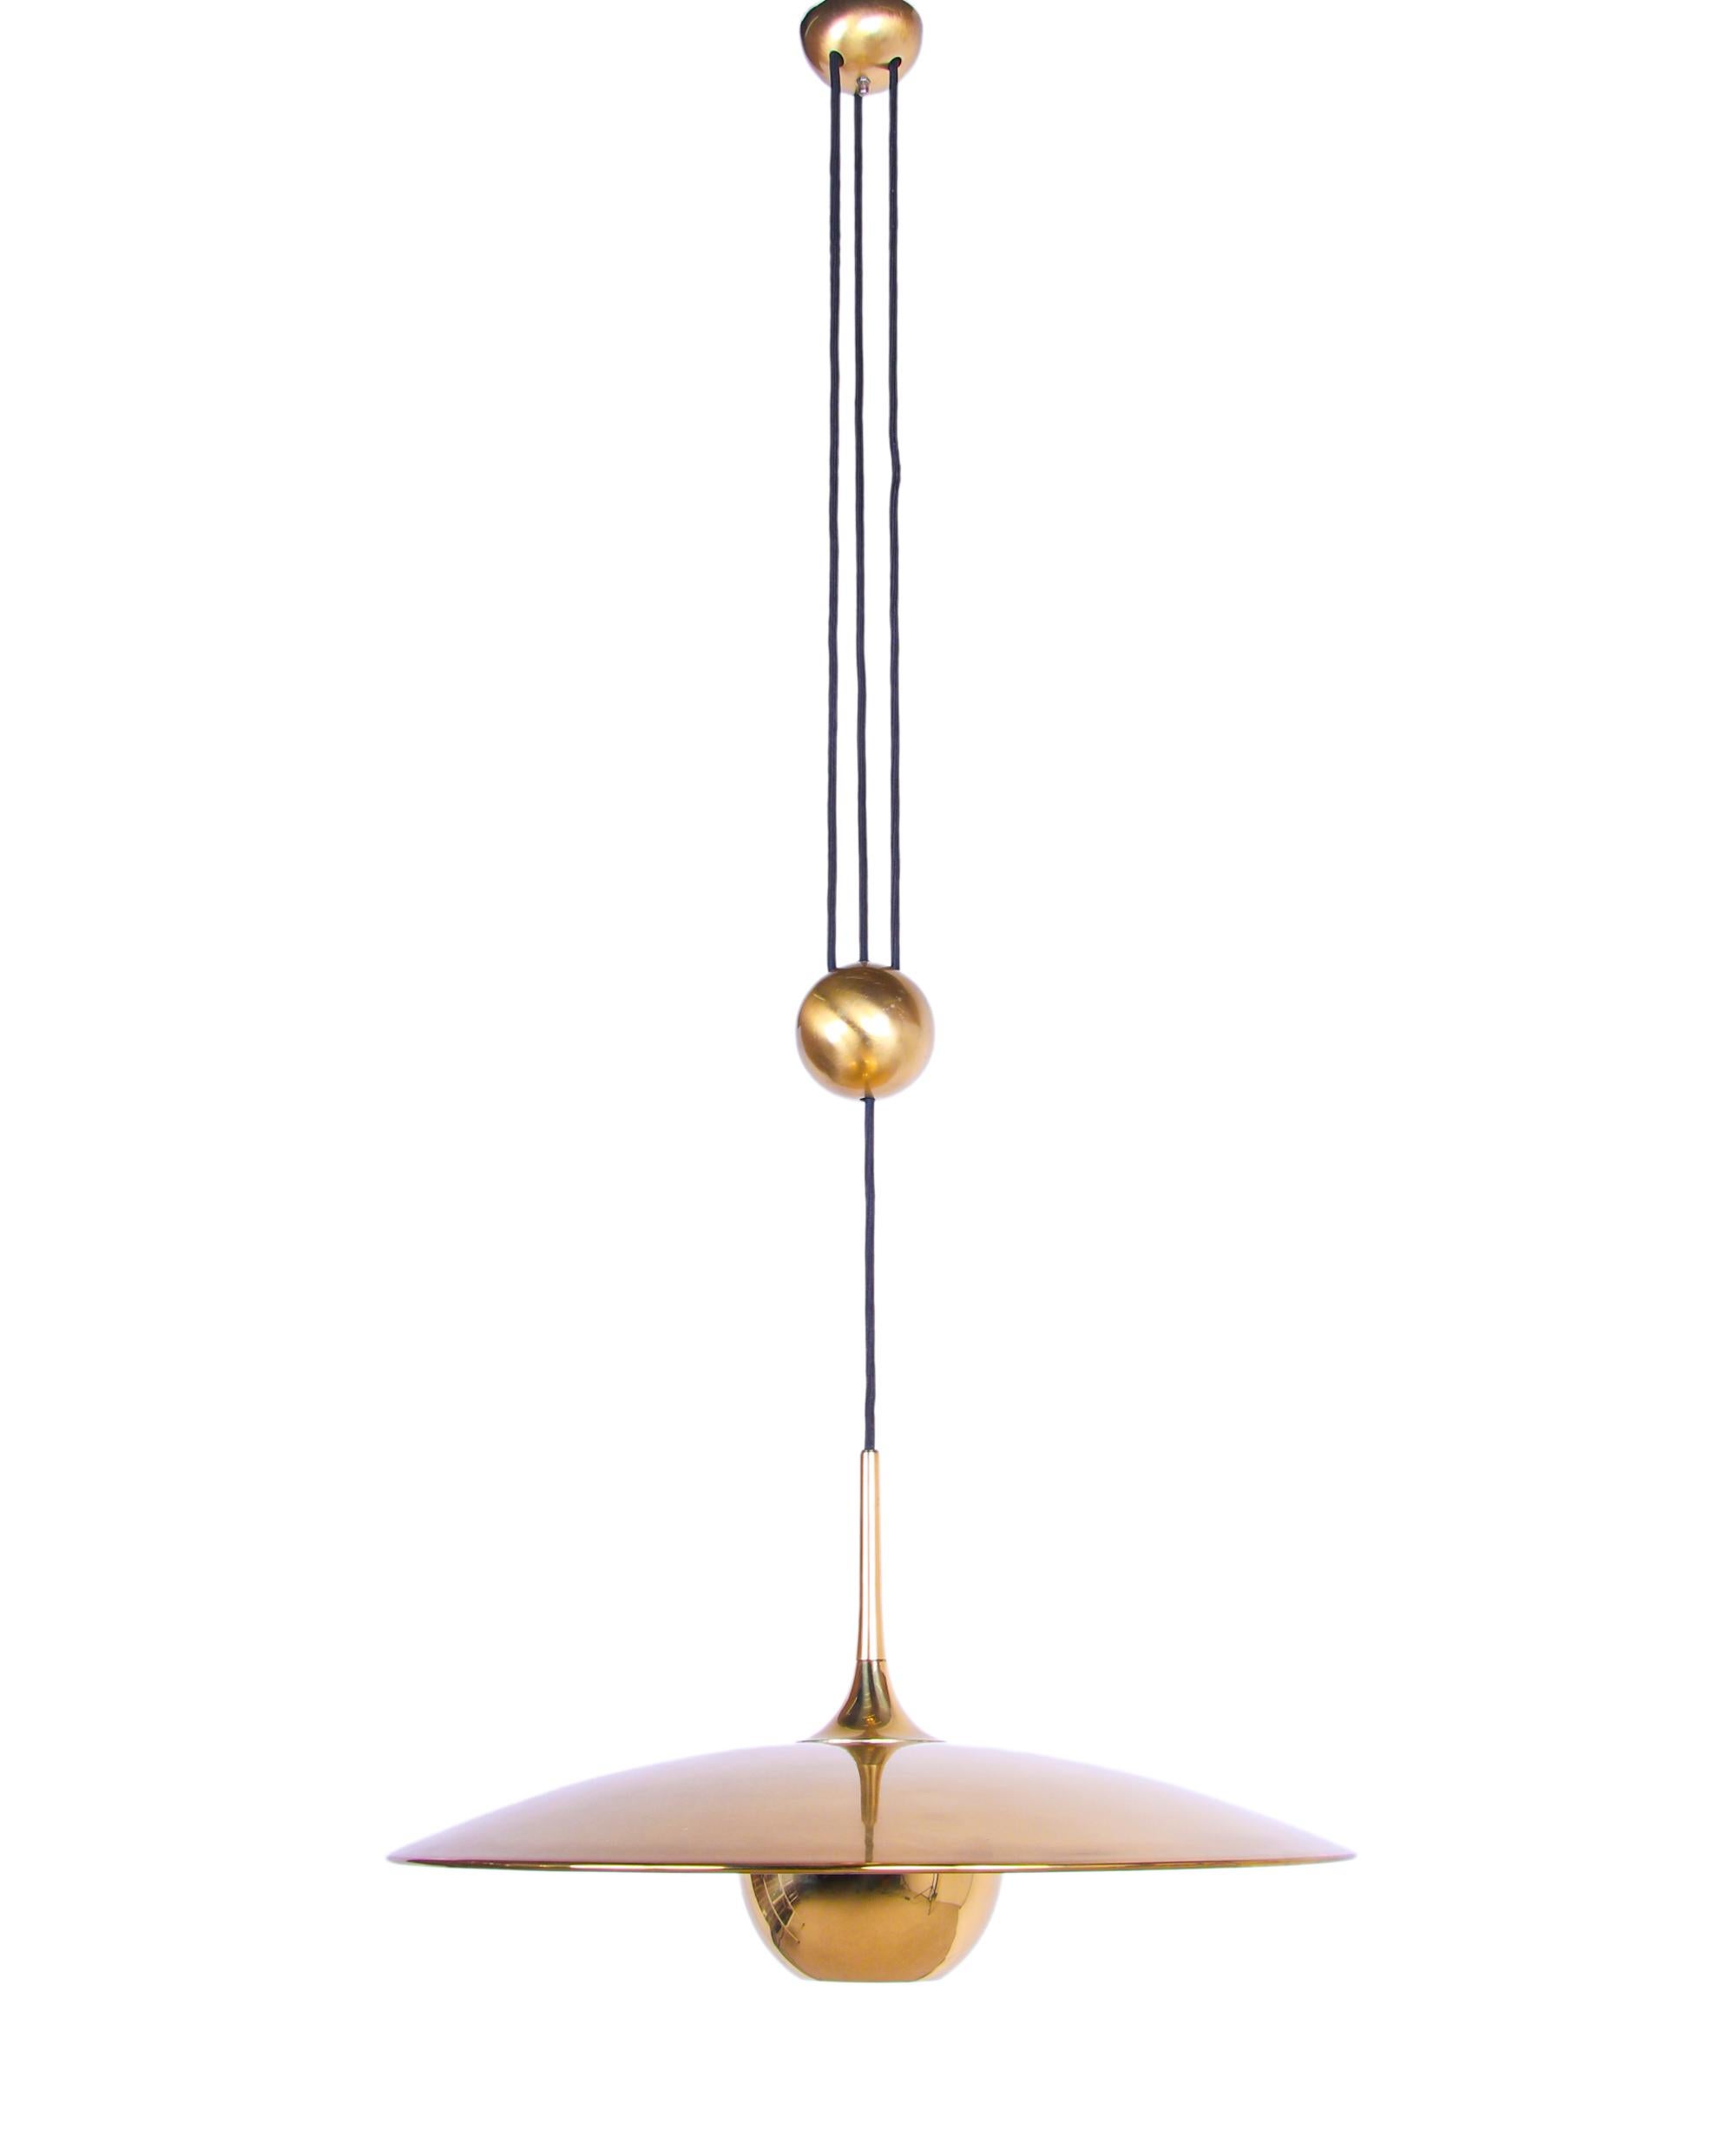 Adjustable Brass Pendant Lamp Onox 55 by Florian Schulz, Germany, 1970s For Sale 3